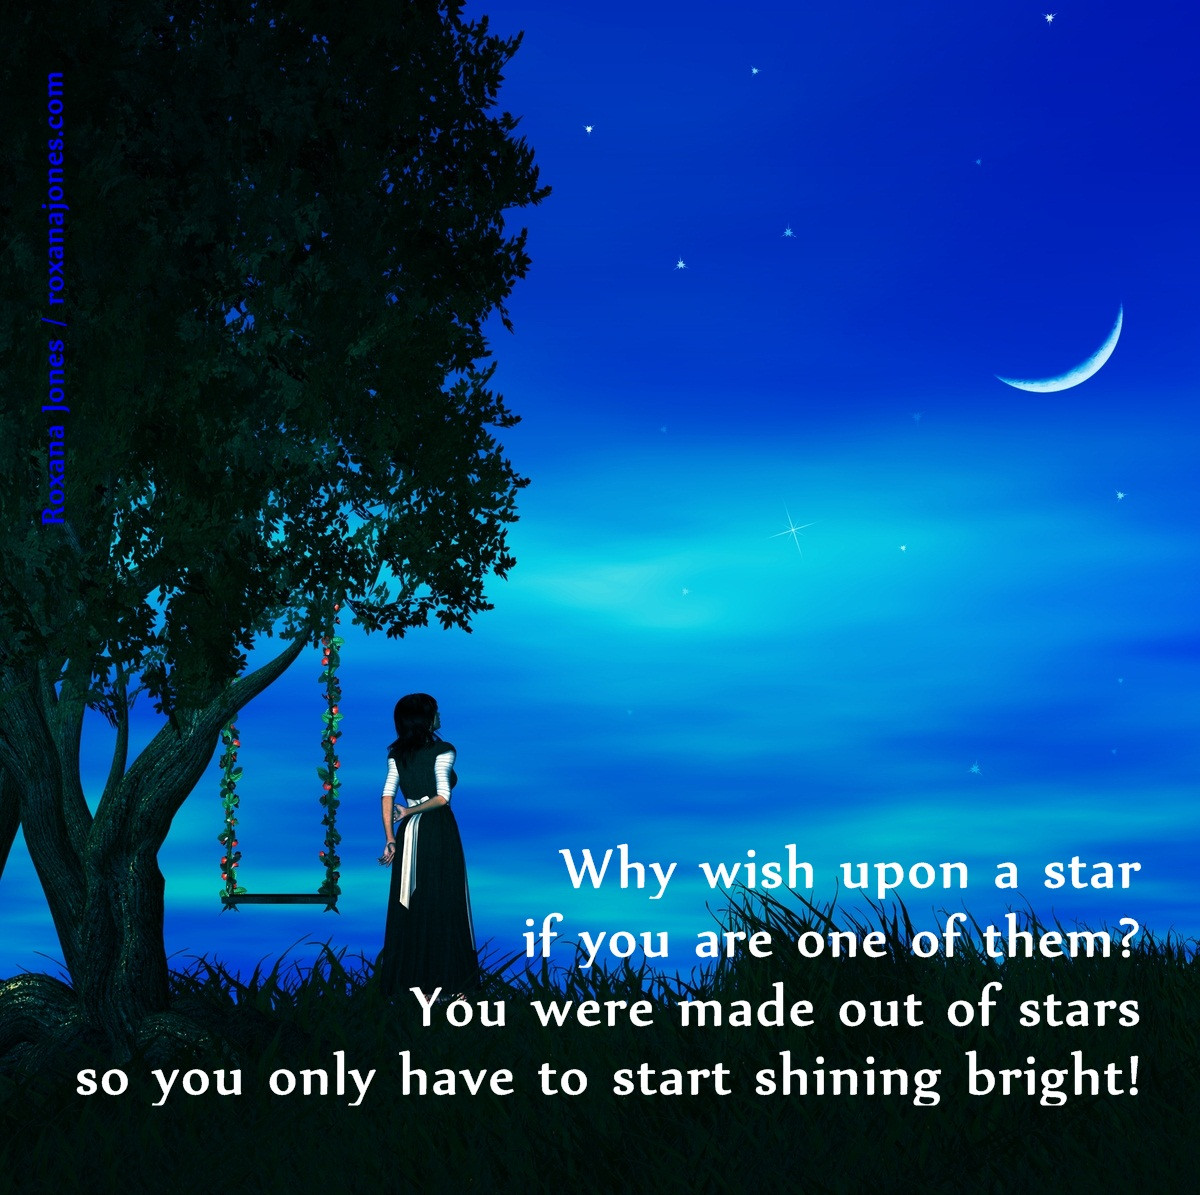 Inspirational Quotes About Stars
 The Star in You Inspirational